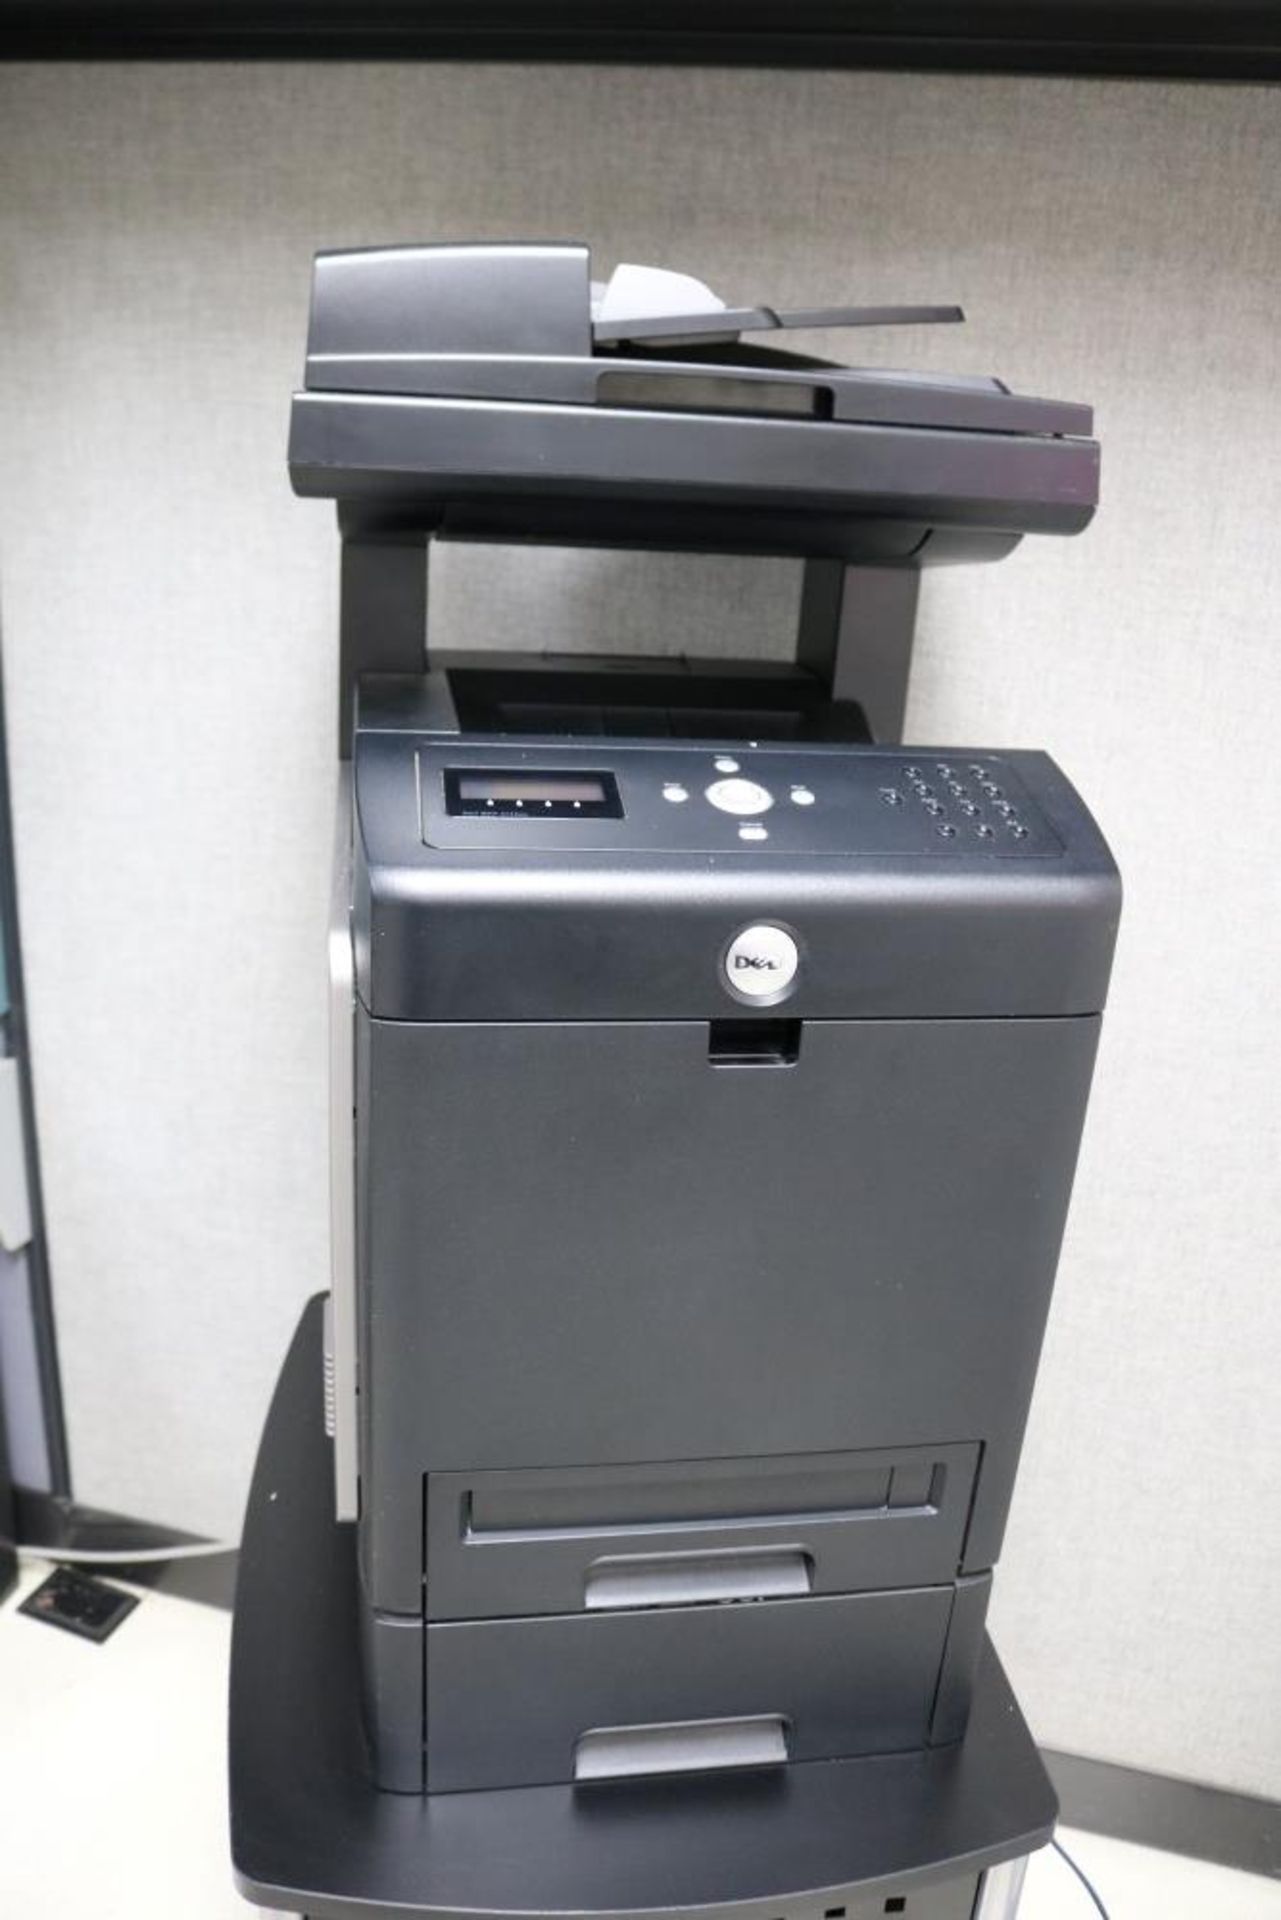 Dell MFP Color Laser Printer, 3115CN, On Small Black Rolling Stand - Image 2 of 7